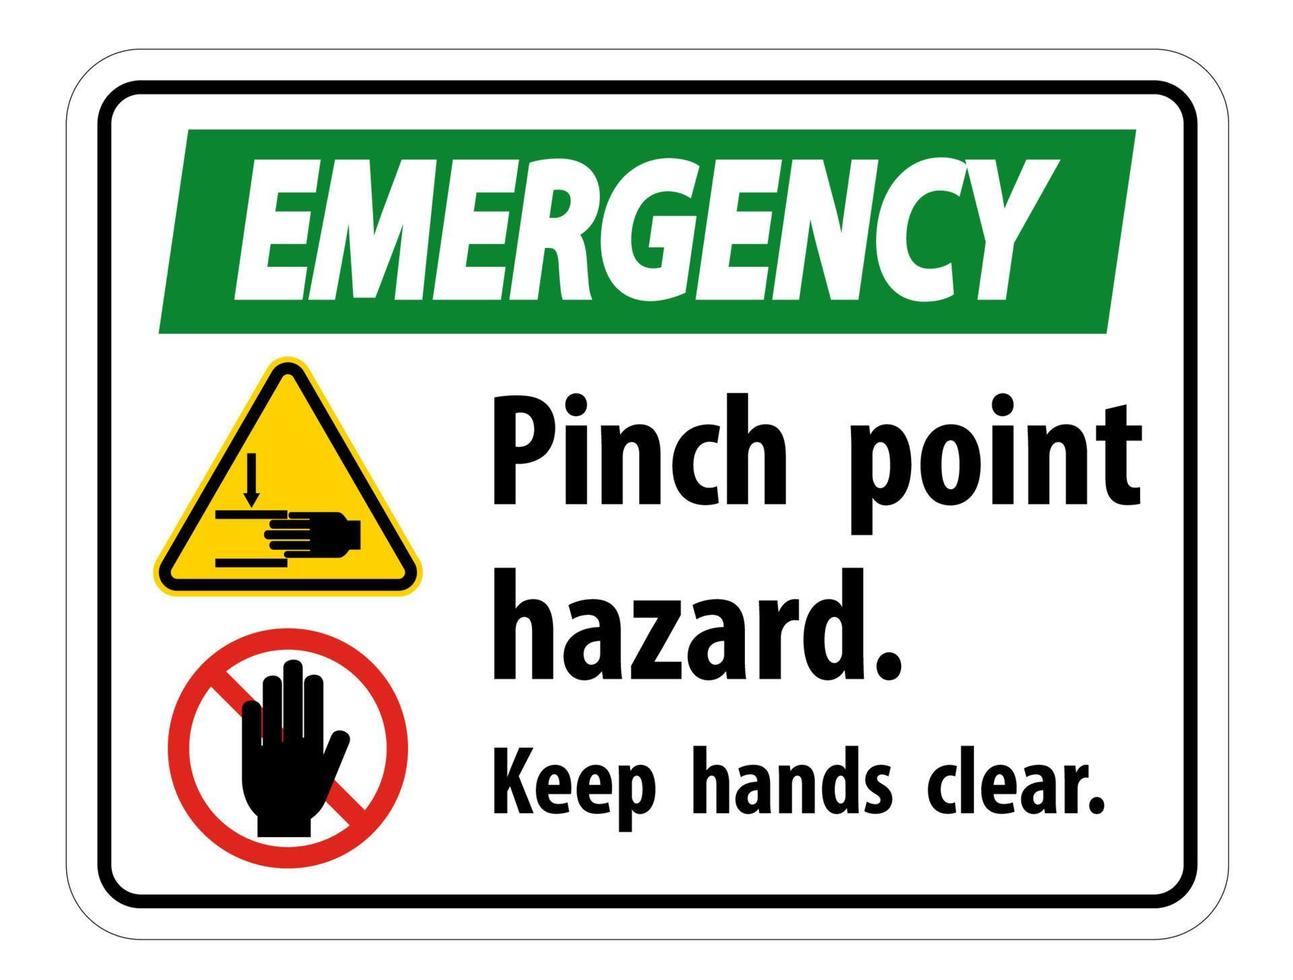 Emergency Pinch Point Hazard,Keep Hands Clear Symbol Sign Isolate on White Background,Vector Illustration vector